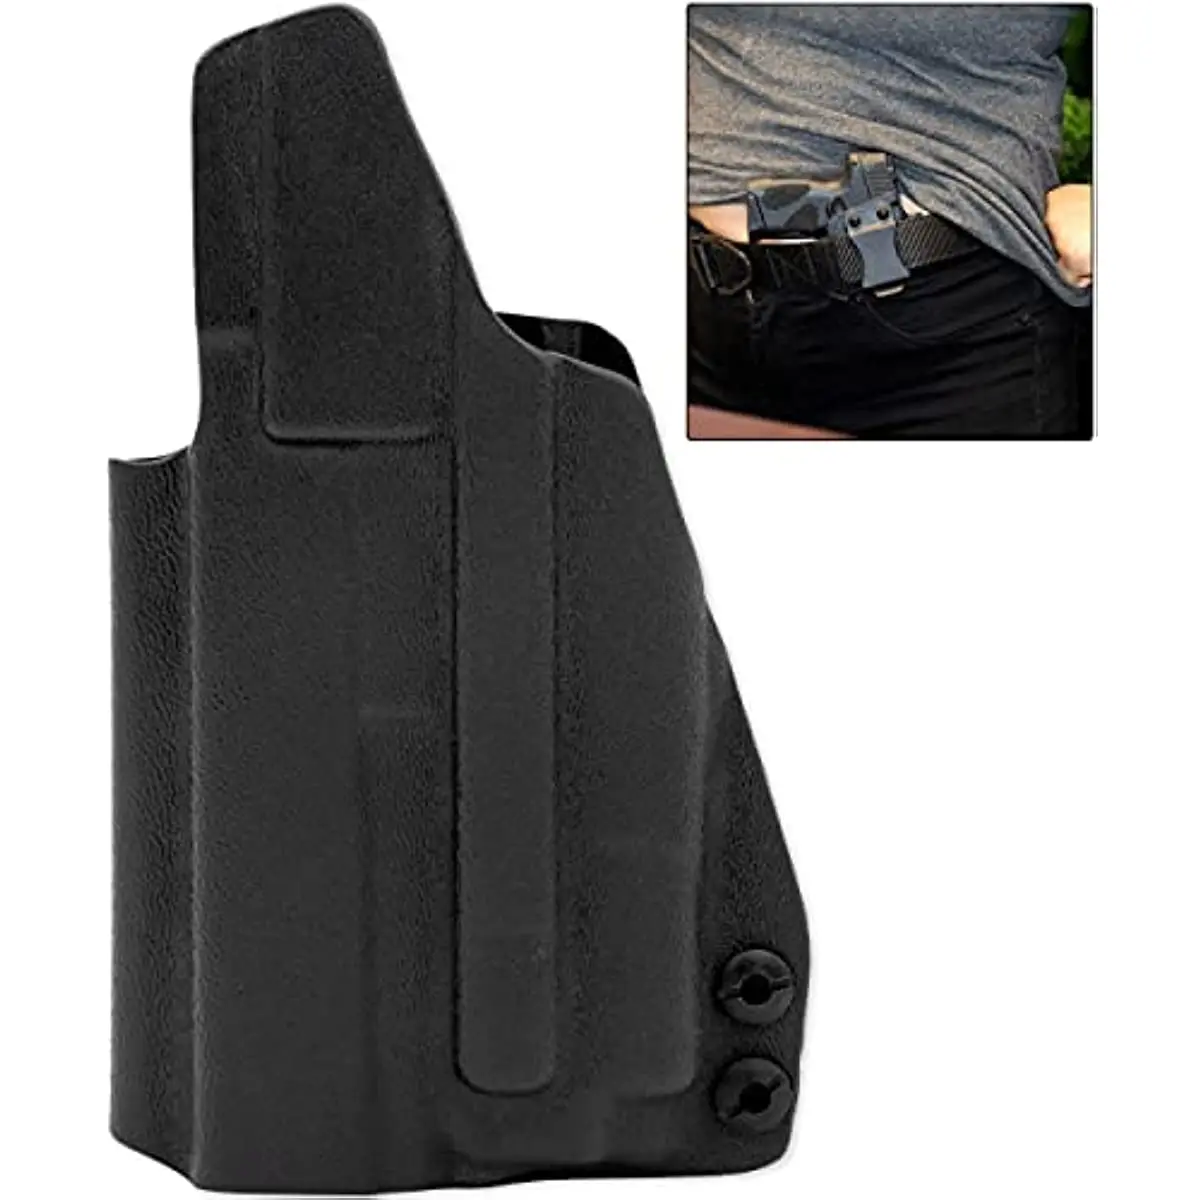 

Magorui Gun Holster G2c G2 G2s Concealment Case For Taurus G2C PT-111 PT-140 Right Hand IWB Case Quick Release Paddle Holsters